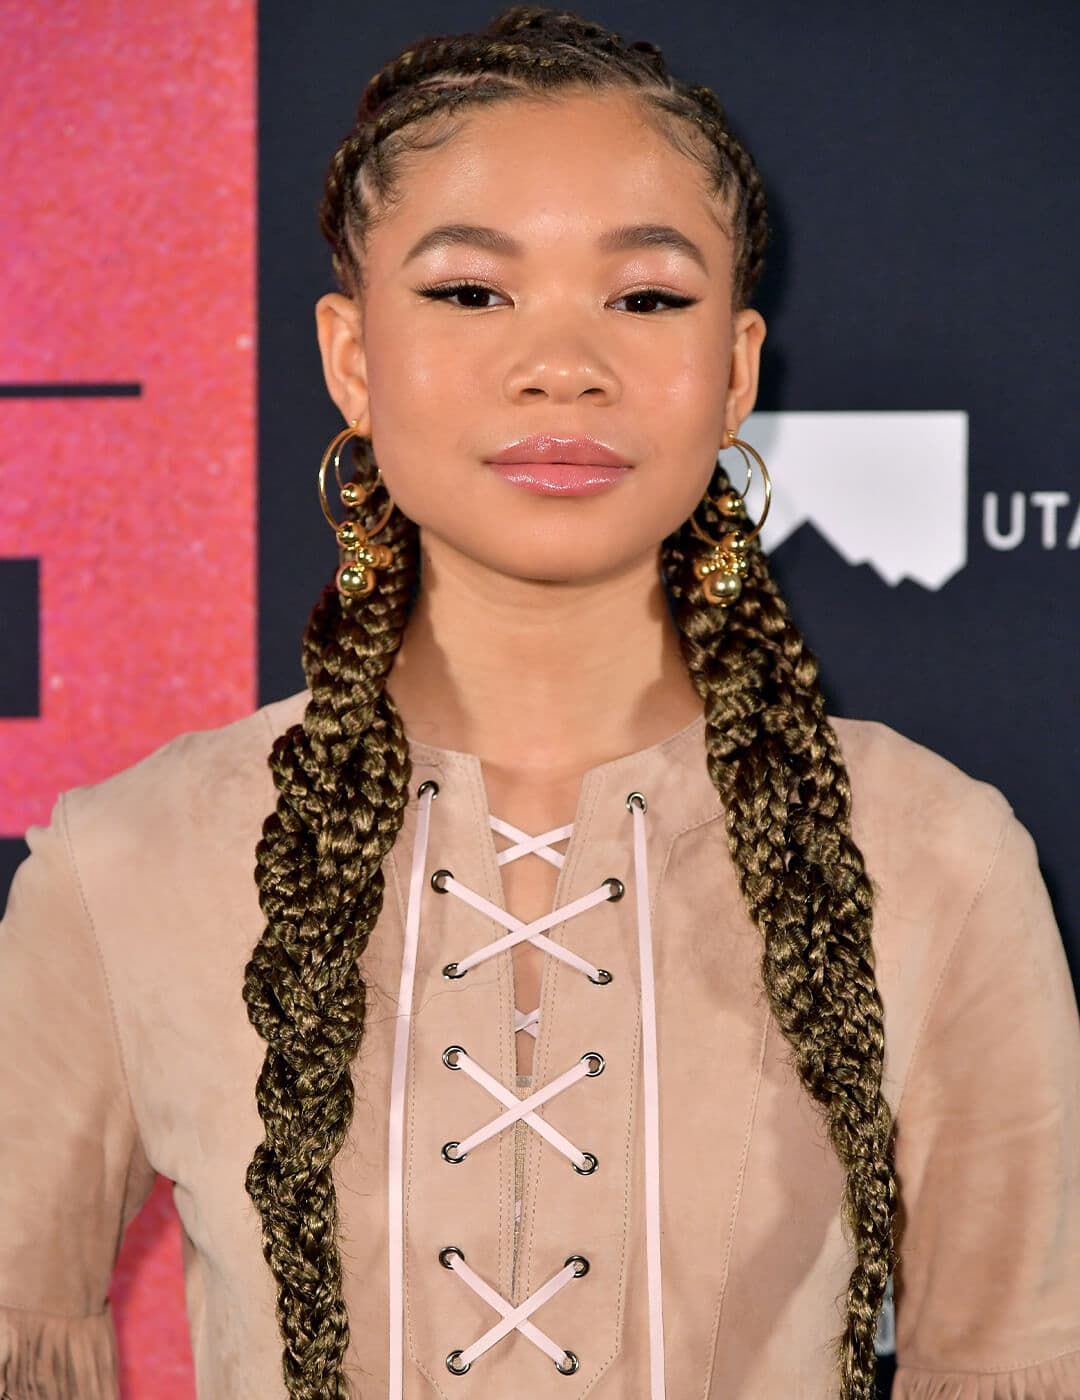 Storm Reid wearing a brown outfit and rocking a braided pigtails hairstyle